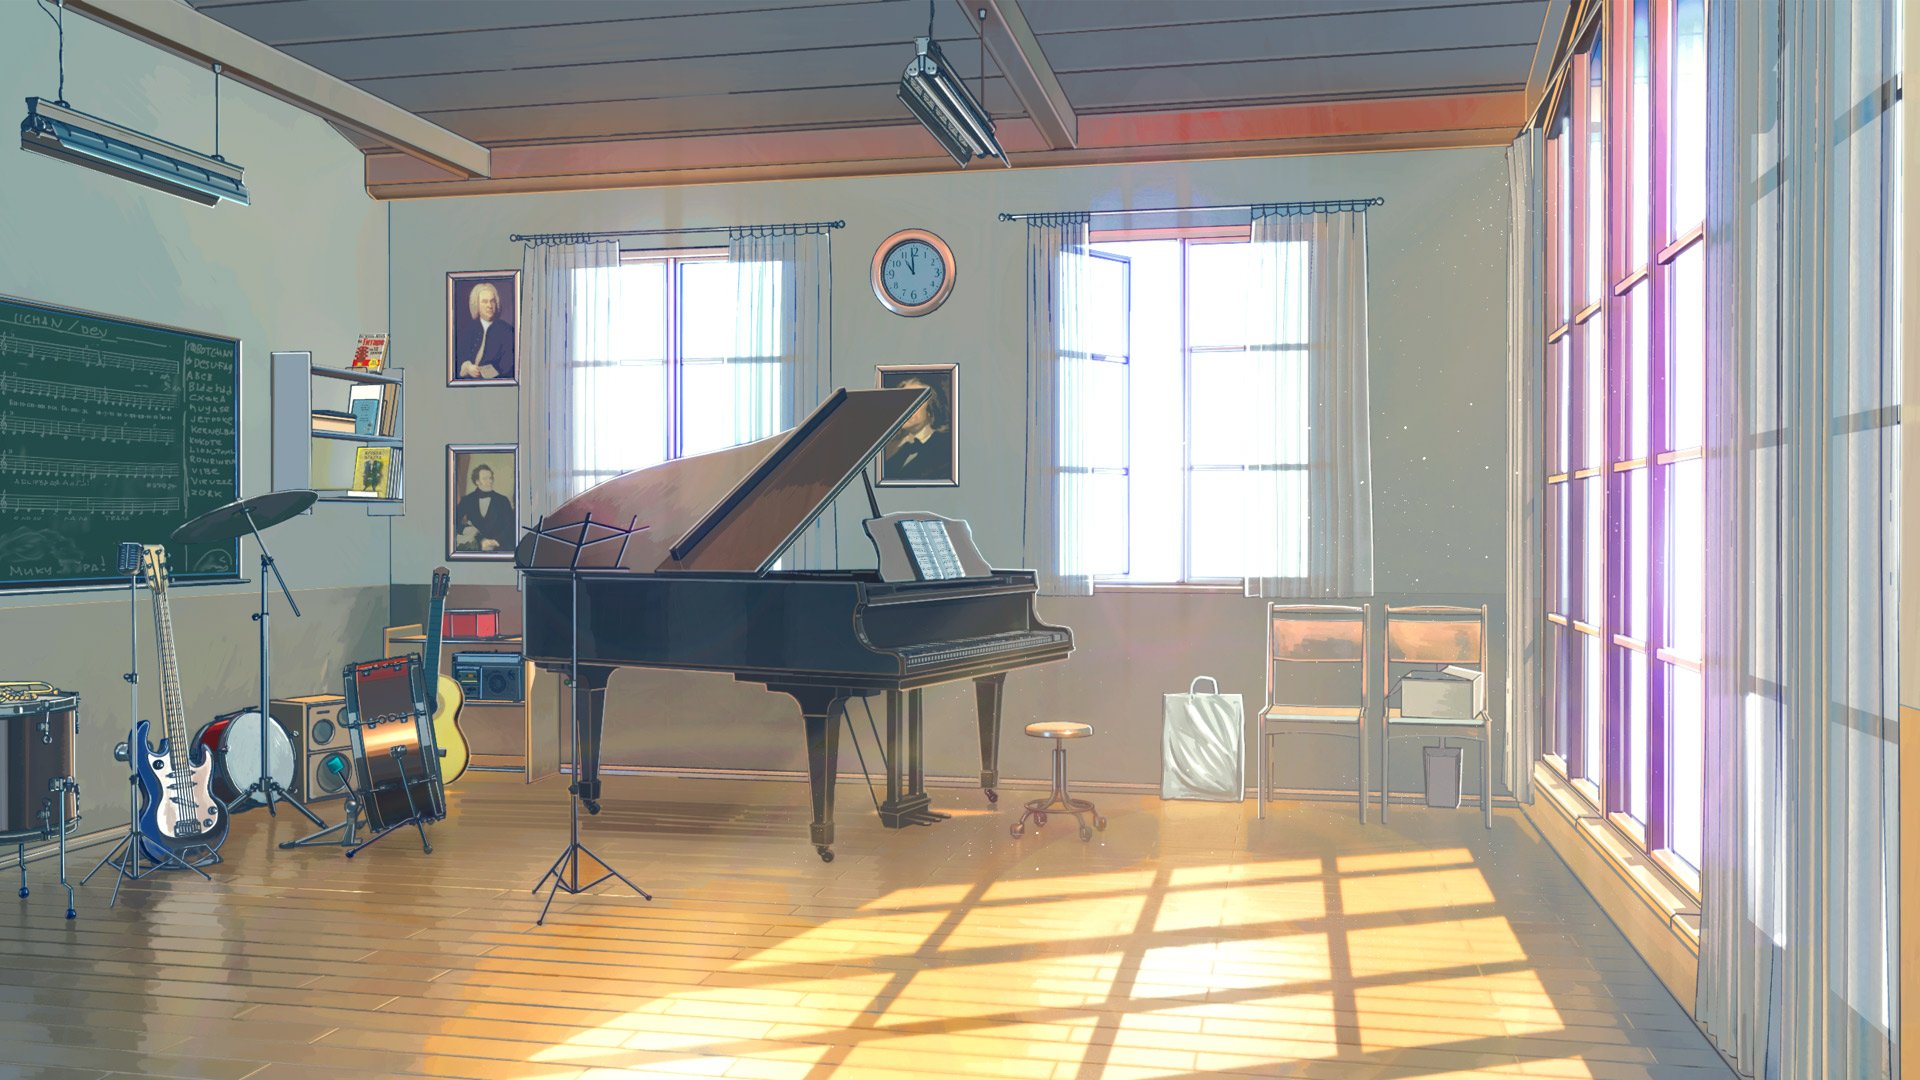 musical, Instruments, Piano, Sunlight, Music, Guitar, Anime, Drums, Window Wallpaper